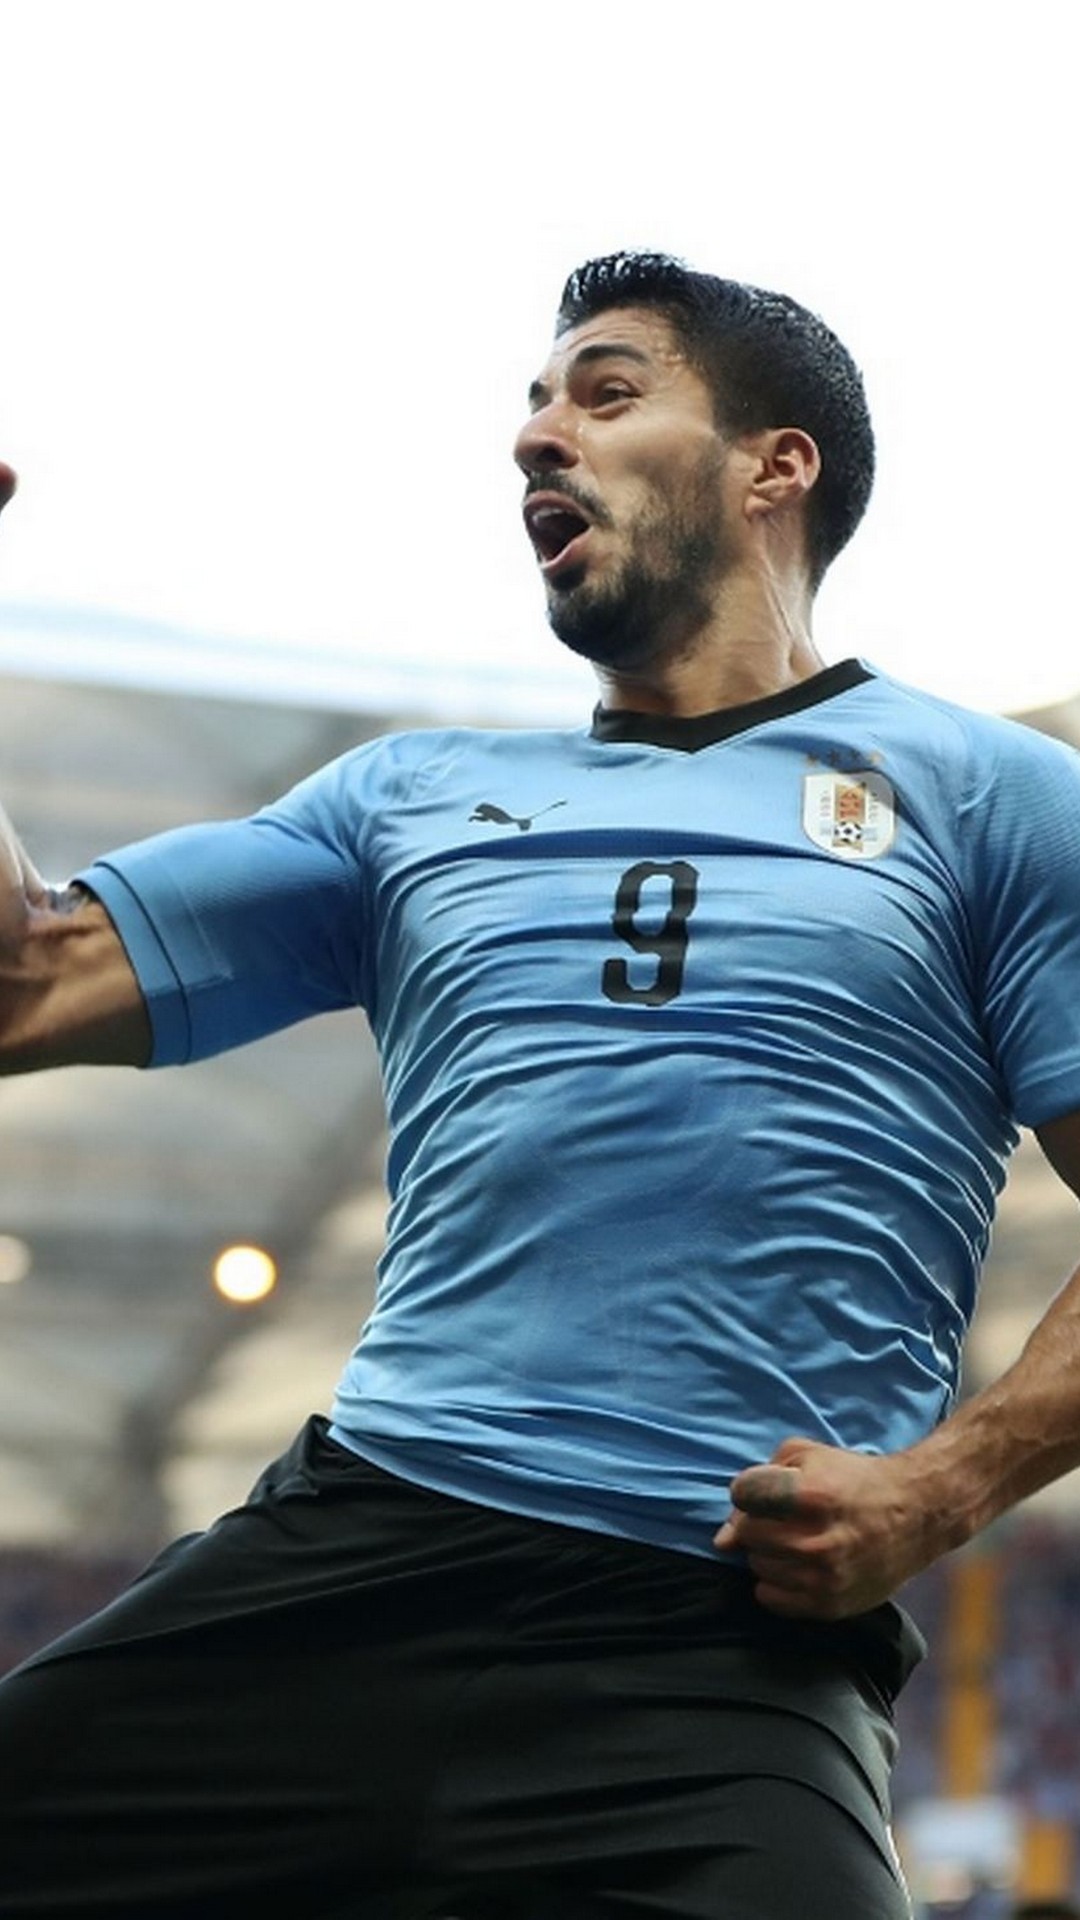 Luis Suarez Uruguay Wallpaper Android with image resolution 1080x1920 pixel. You can make this wallpaper for your Android backgrounds, Tablet, Smartphones Screensavers and Mobile Phone Lock Screen